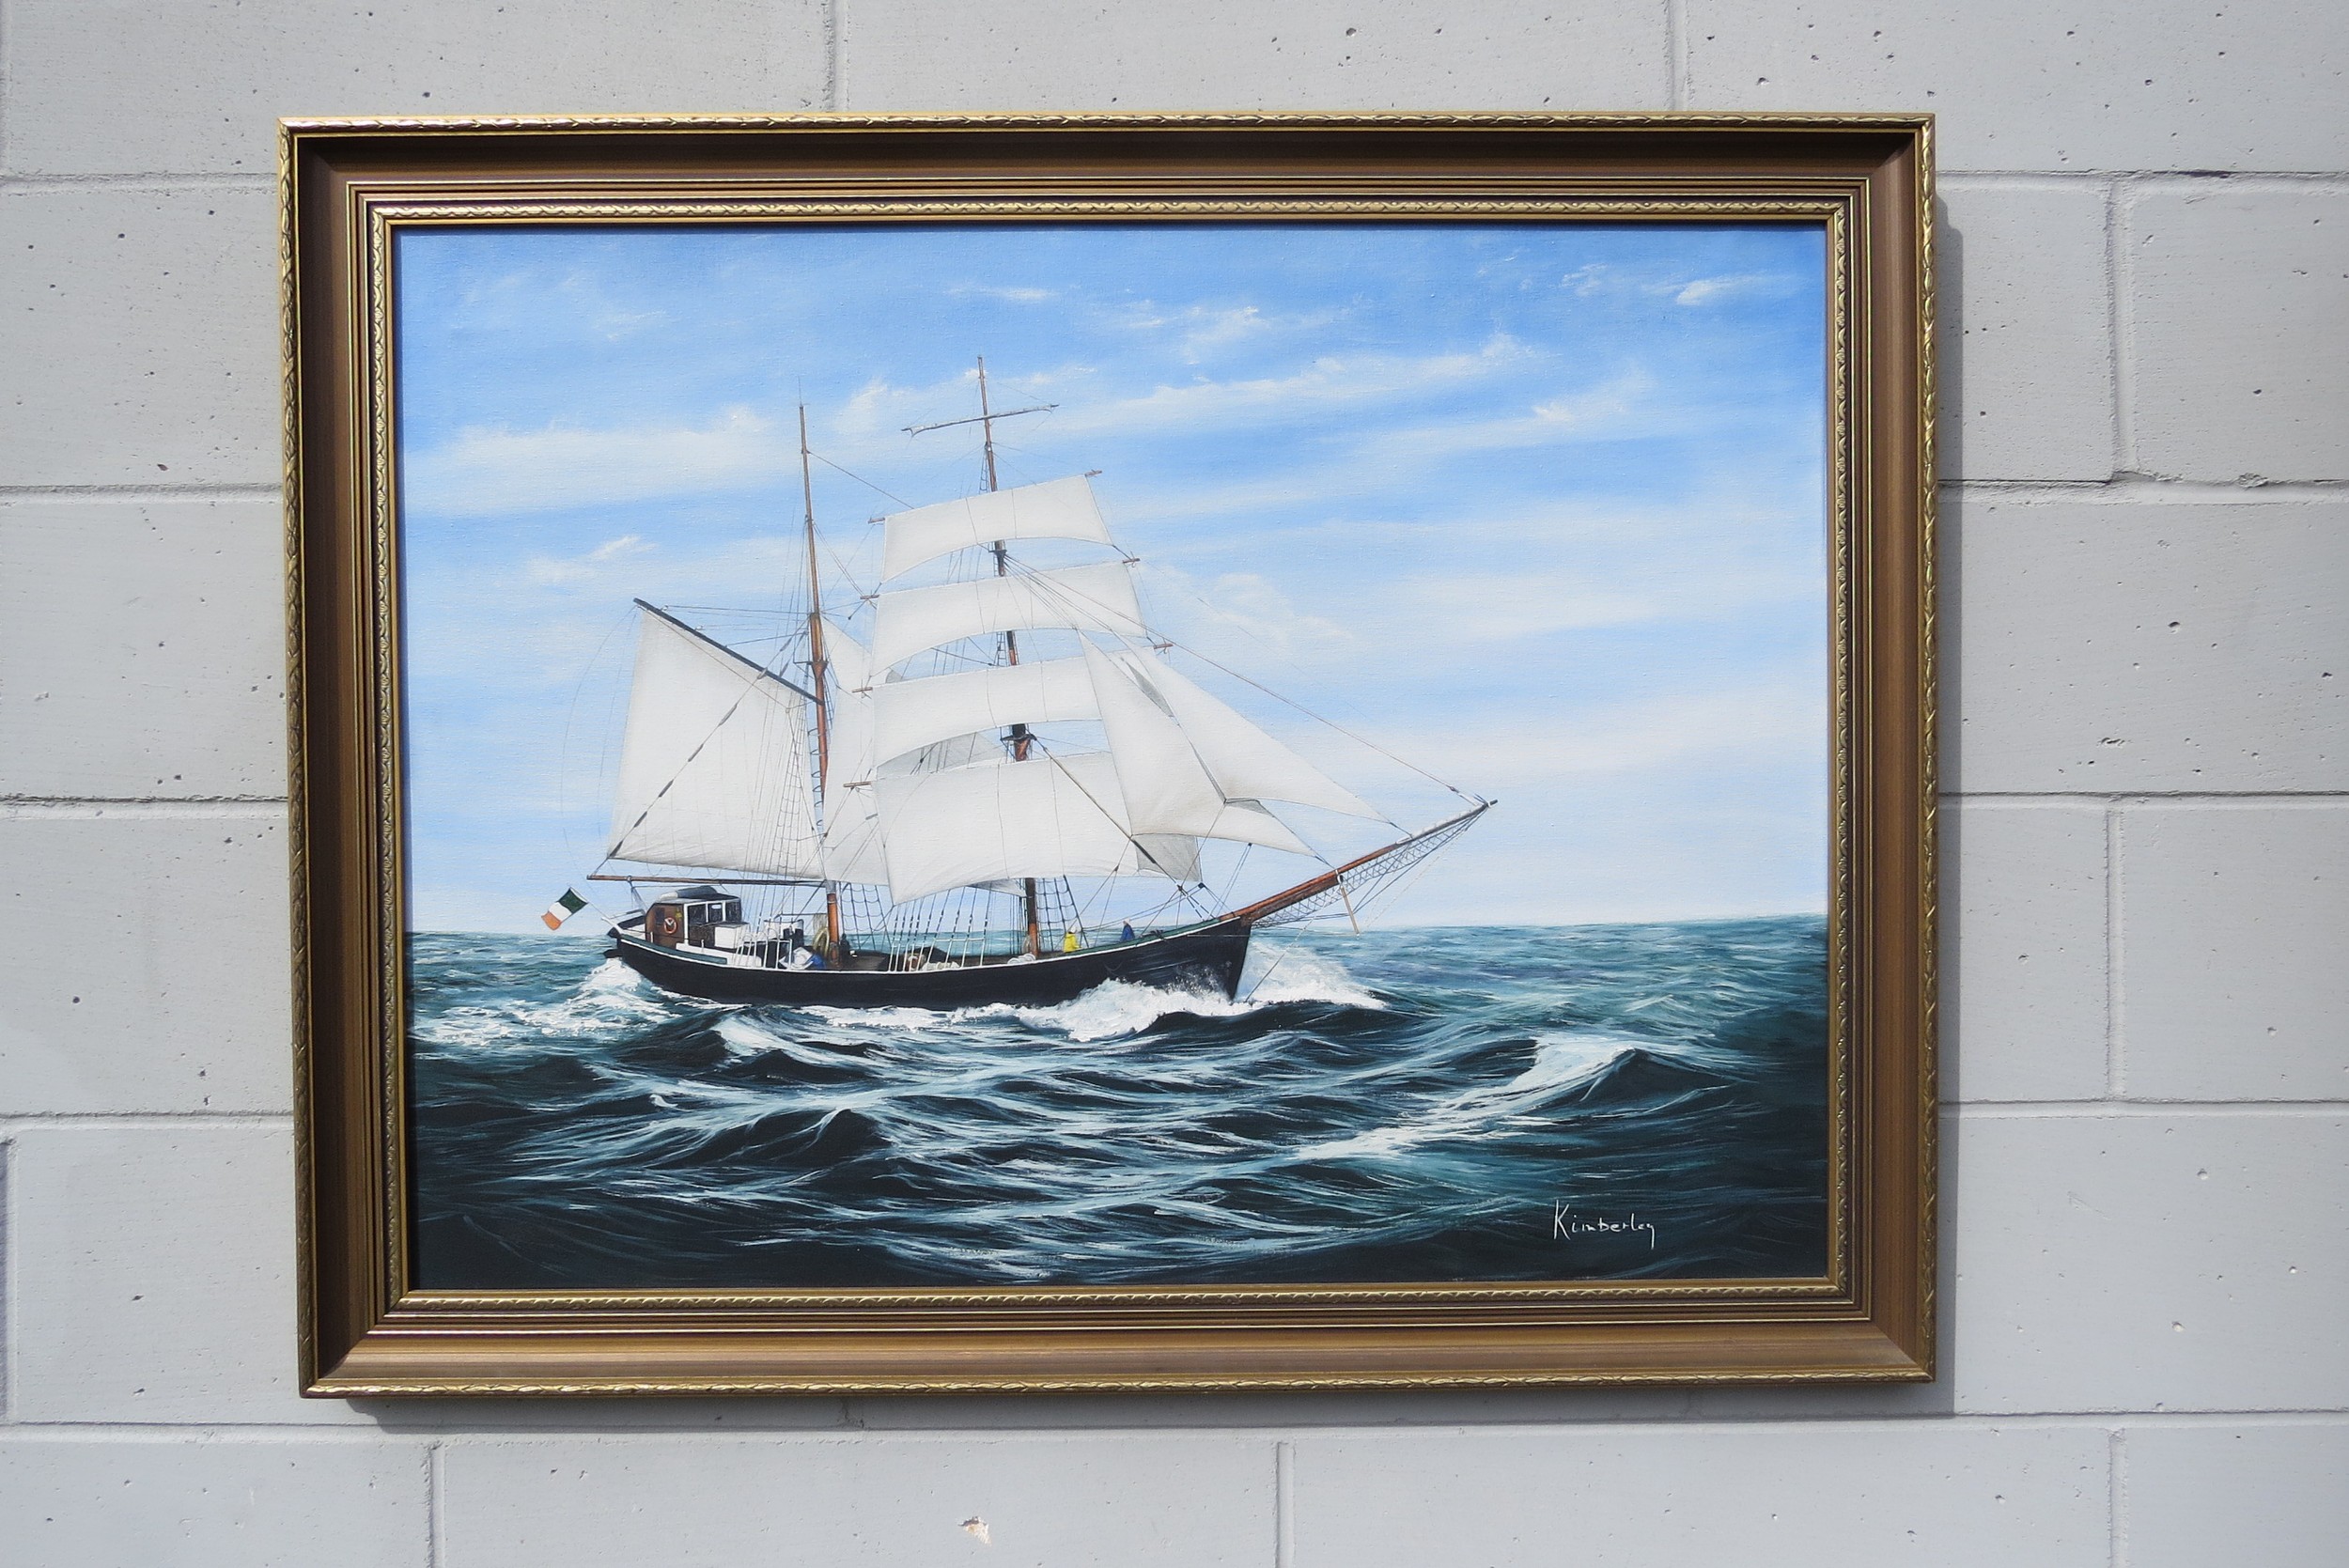 KIMBERLEY (XX) A framed large oil on canvas depicting the Brigantine 'Pheonix'. Signed bottom